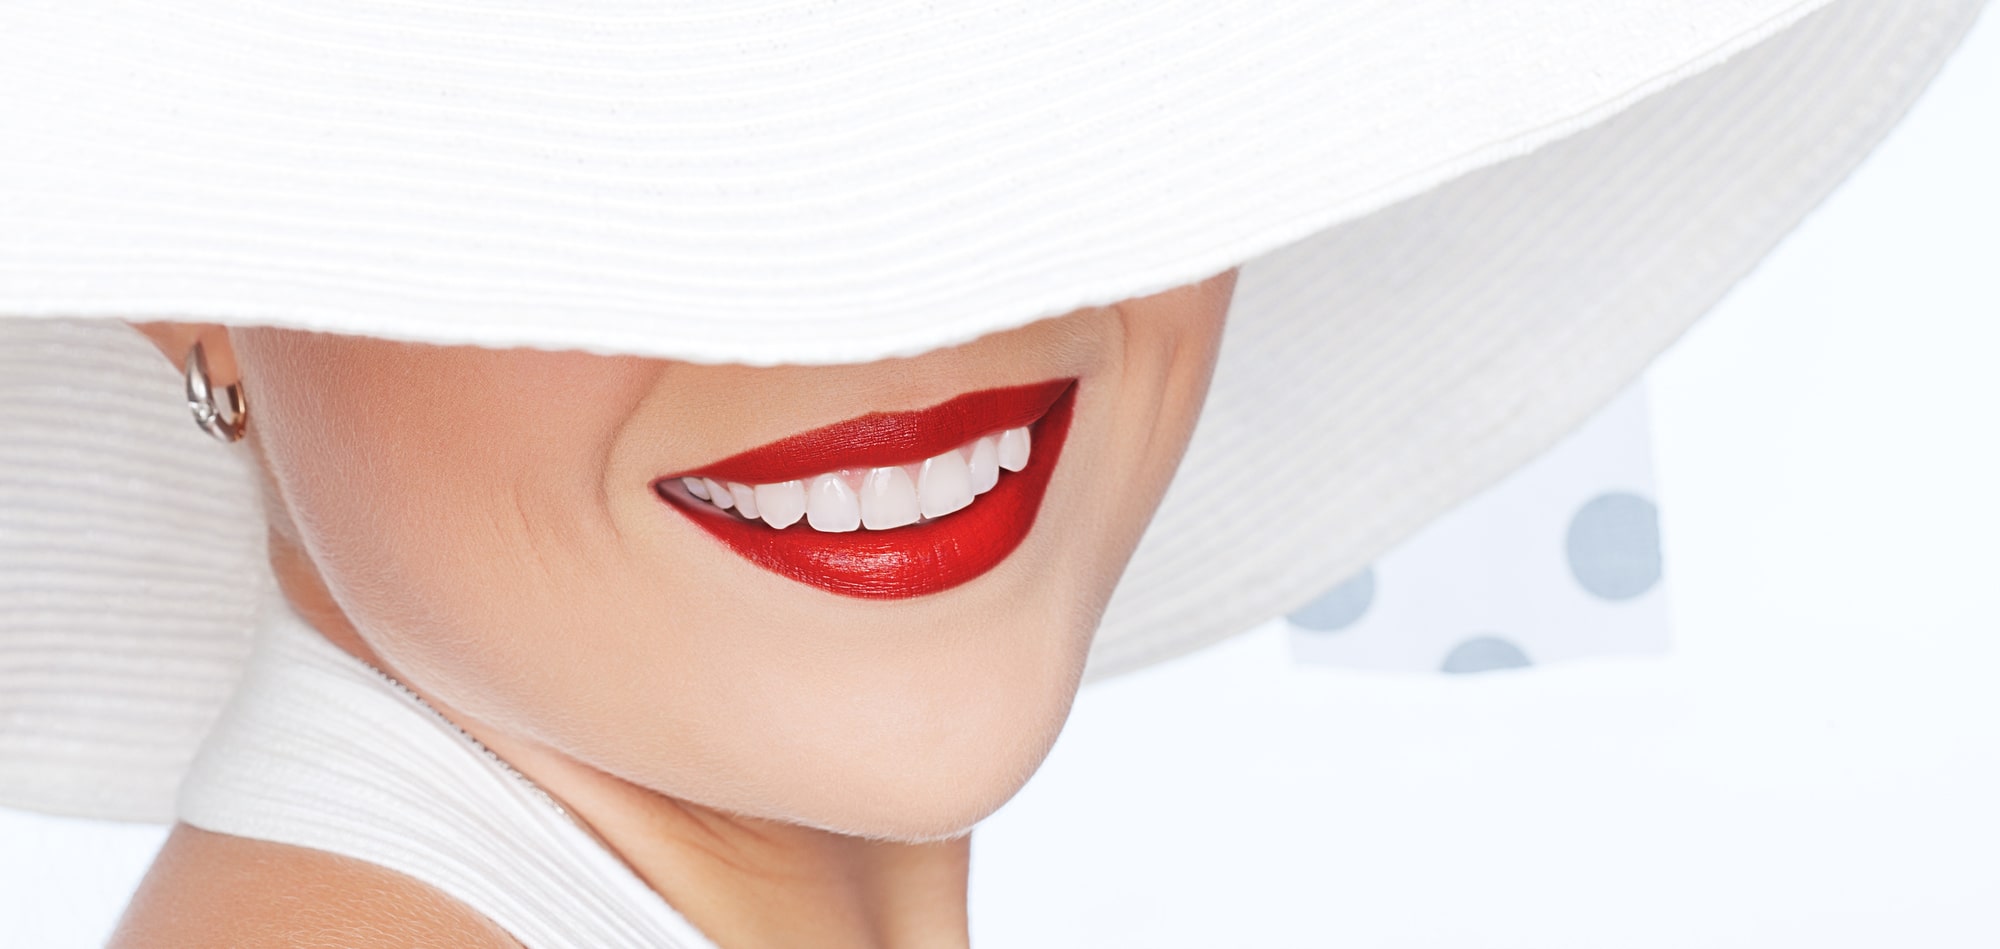 American Academy of Cosmetic Dentistry - What You Need to Know